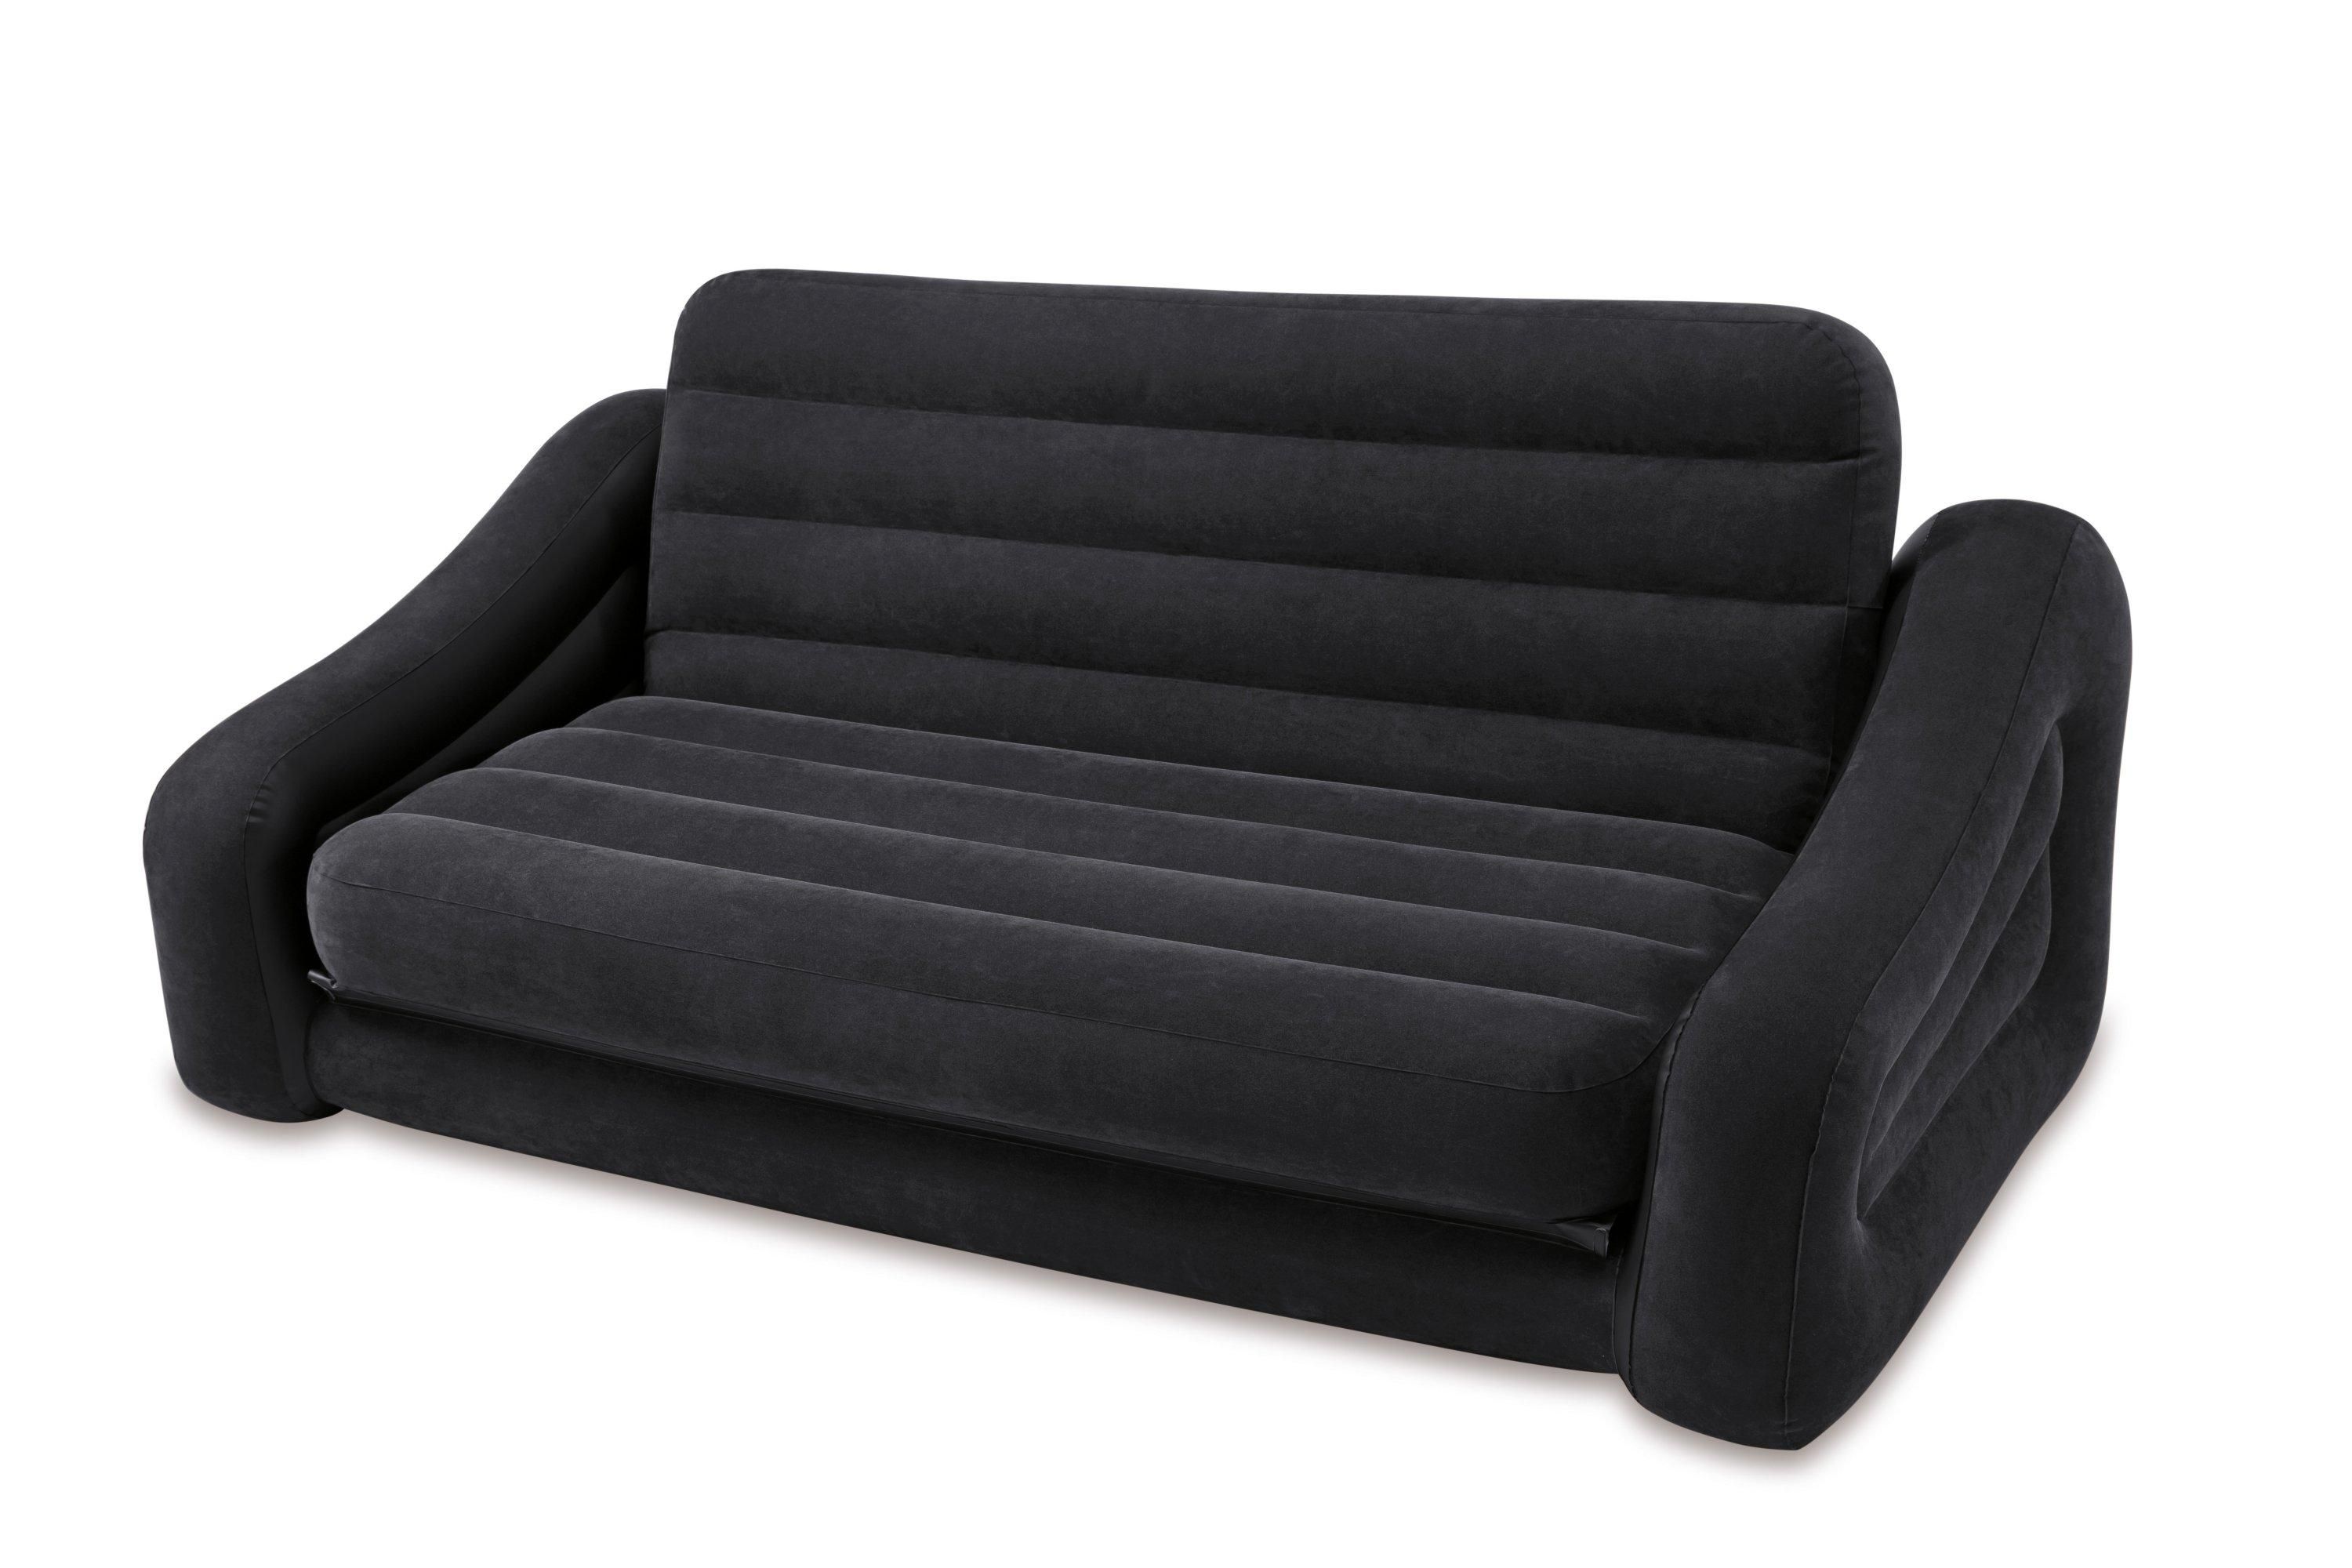 Intex Inflatable Pull Out Sofa Queen Bed Sleeper 68566Ep + 66619E Within Intex Queen Sleeper Sofas (View 12 of 20)